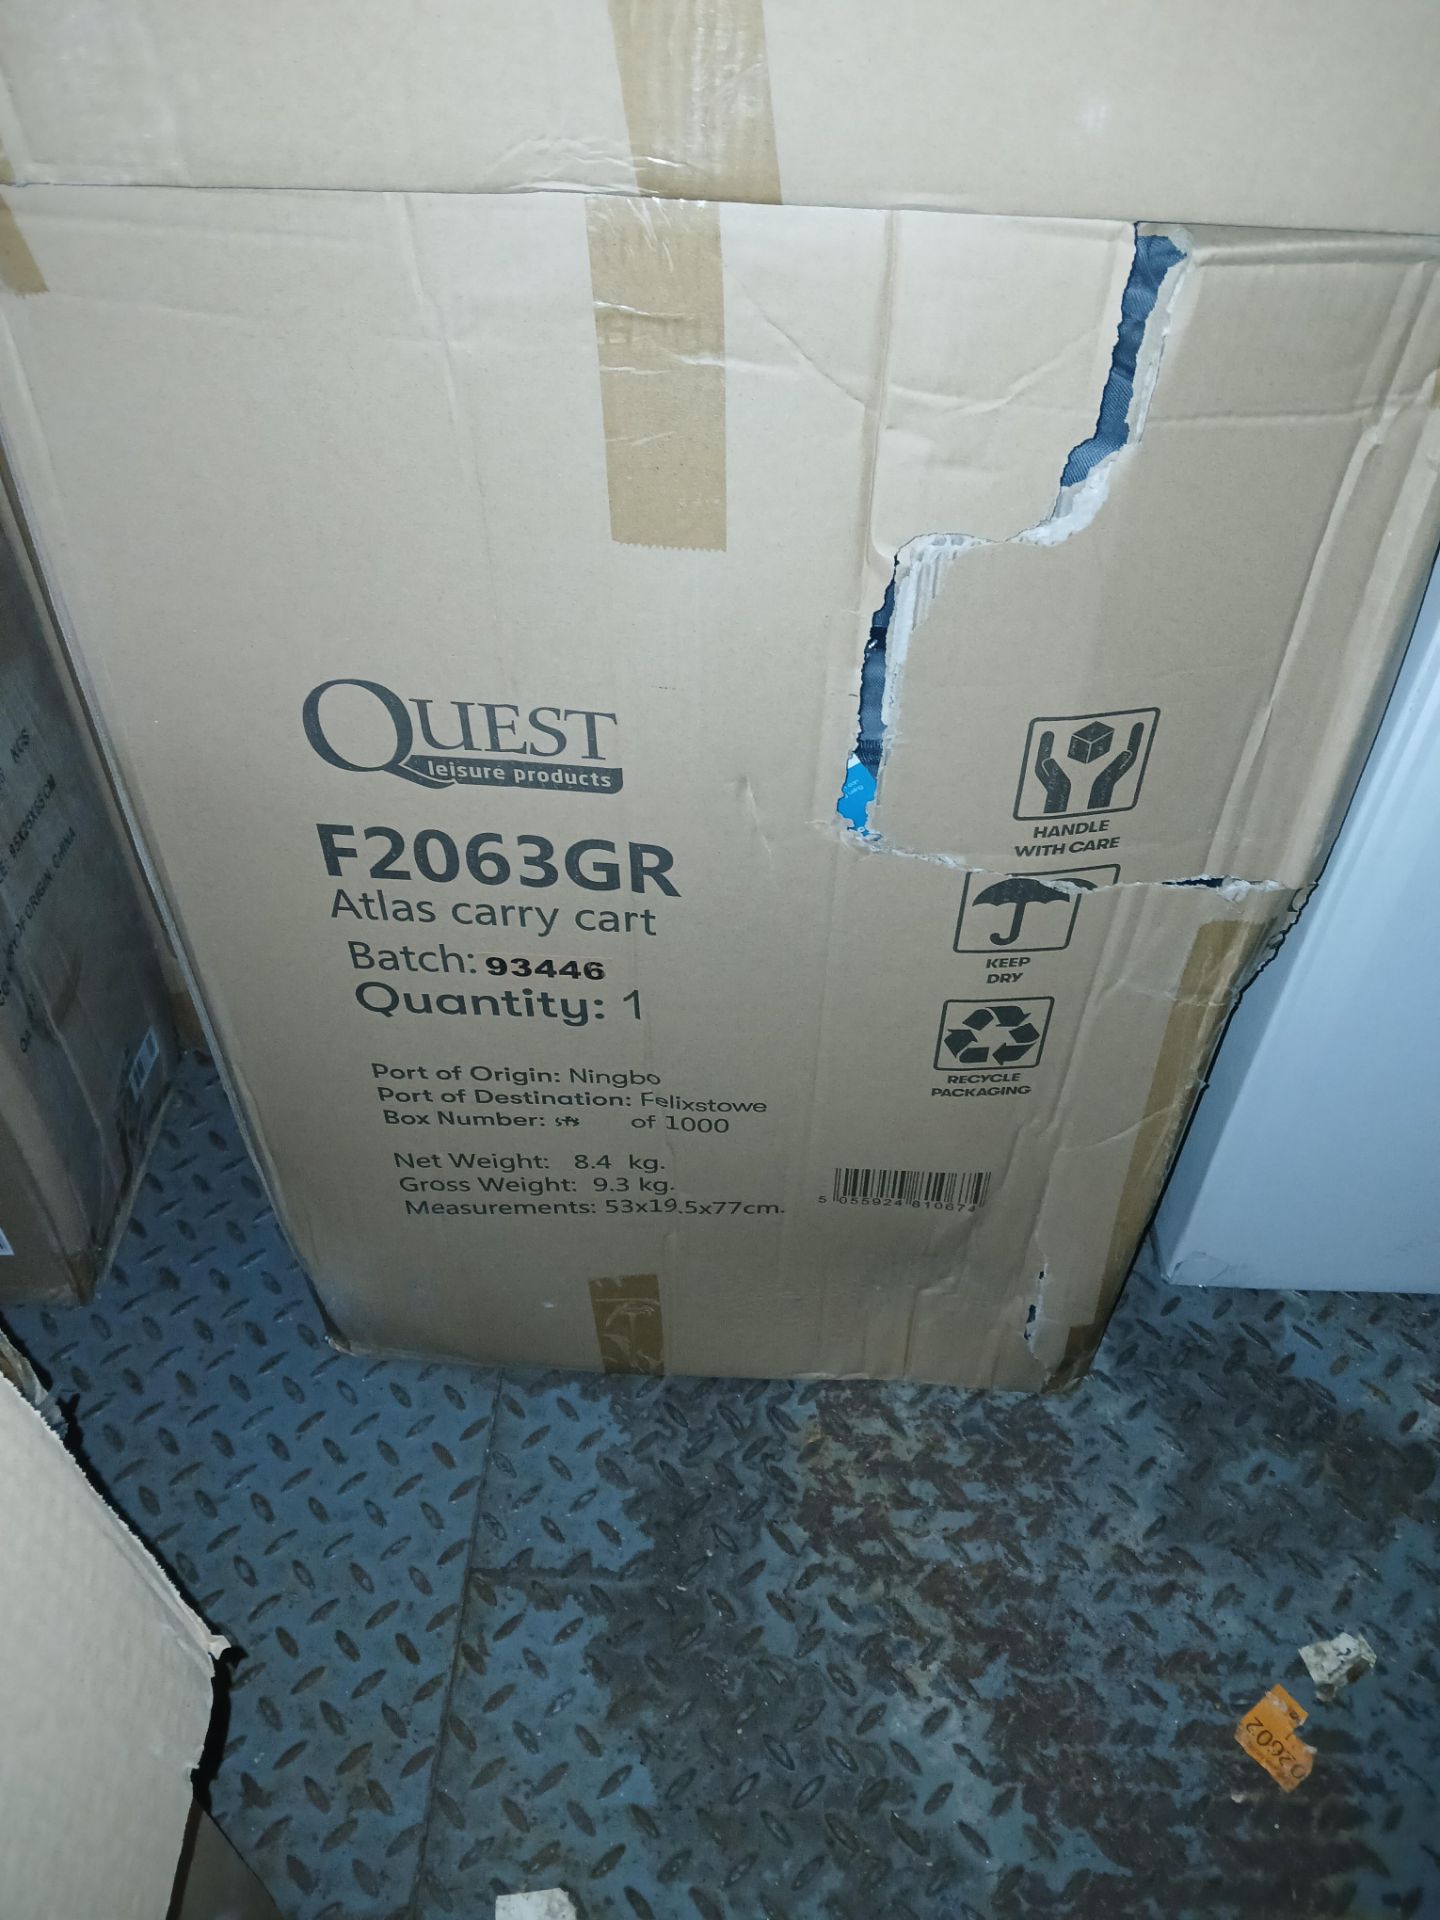 2 x Quest F2063 GR Atlas Carry Cart (Please note, Viewing Strongly Recommended - Eddisons have not